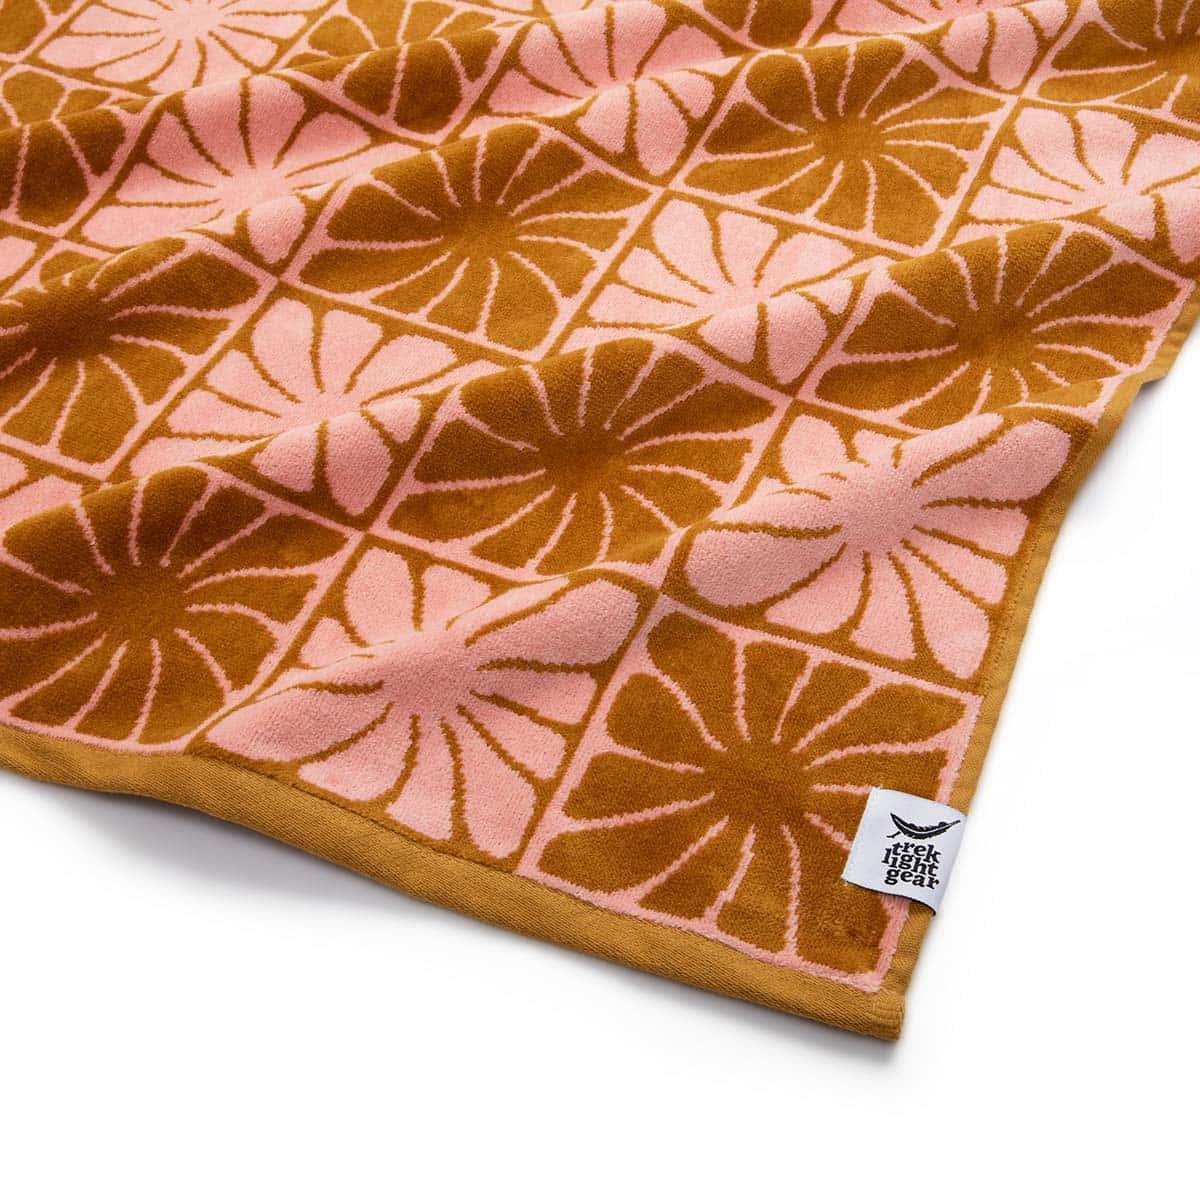 Groovy Flowers Bath Towel. 100% Sustainably Sourced Cotton. Super Soft